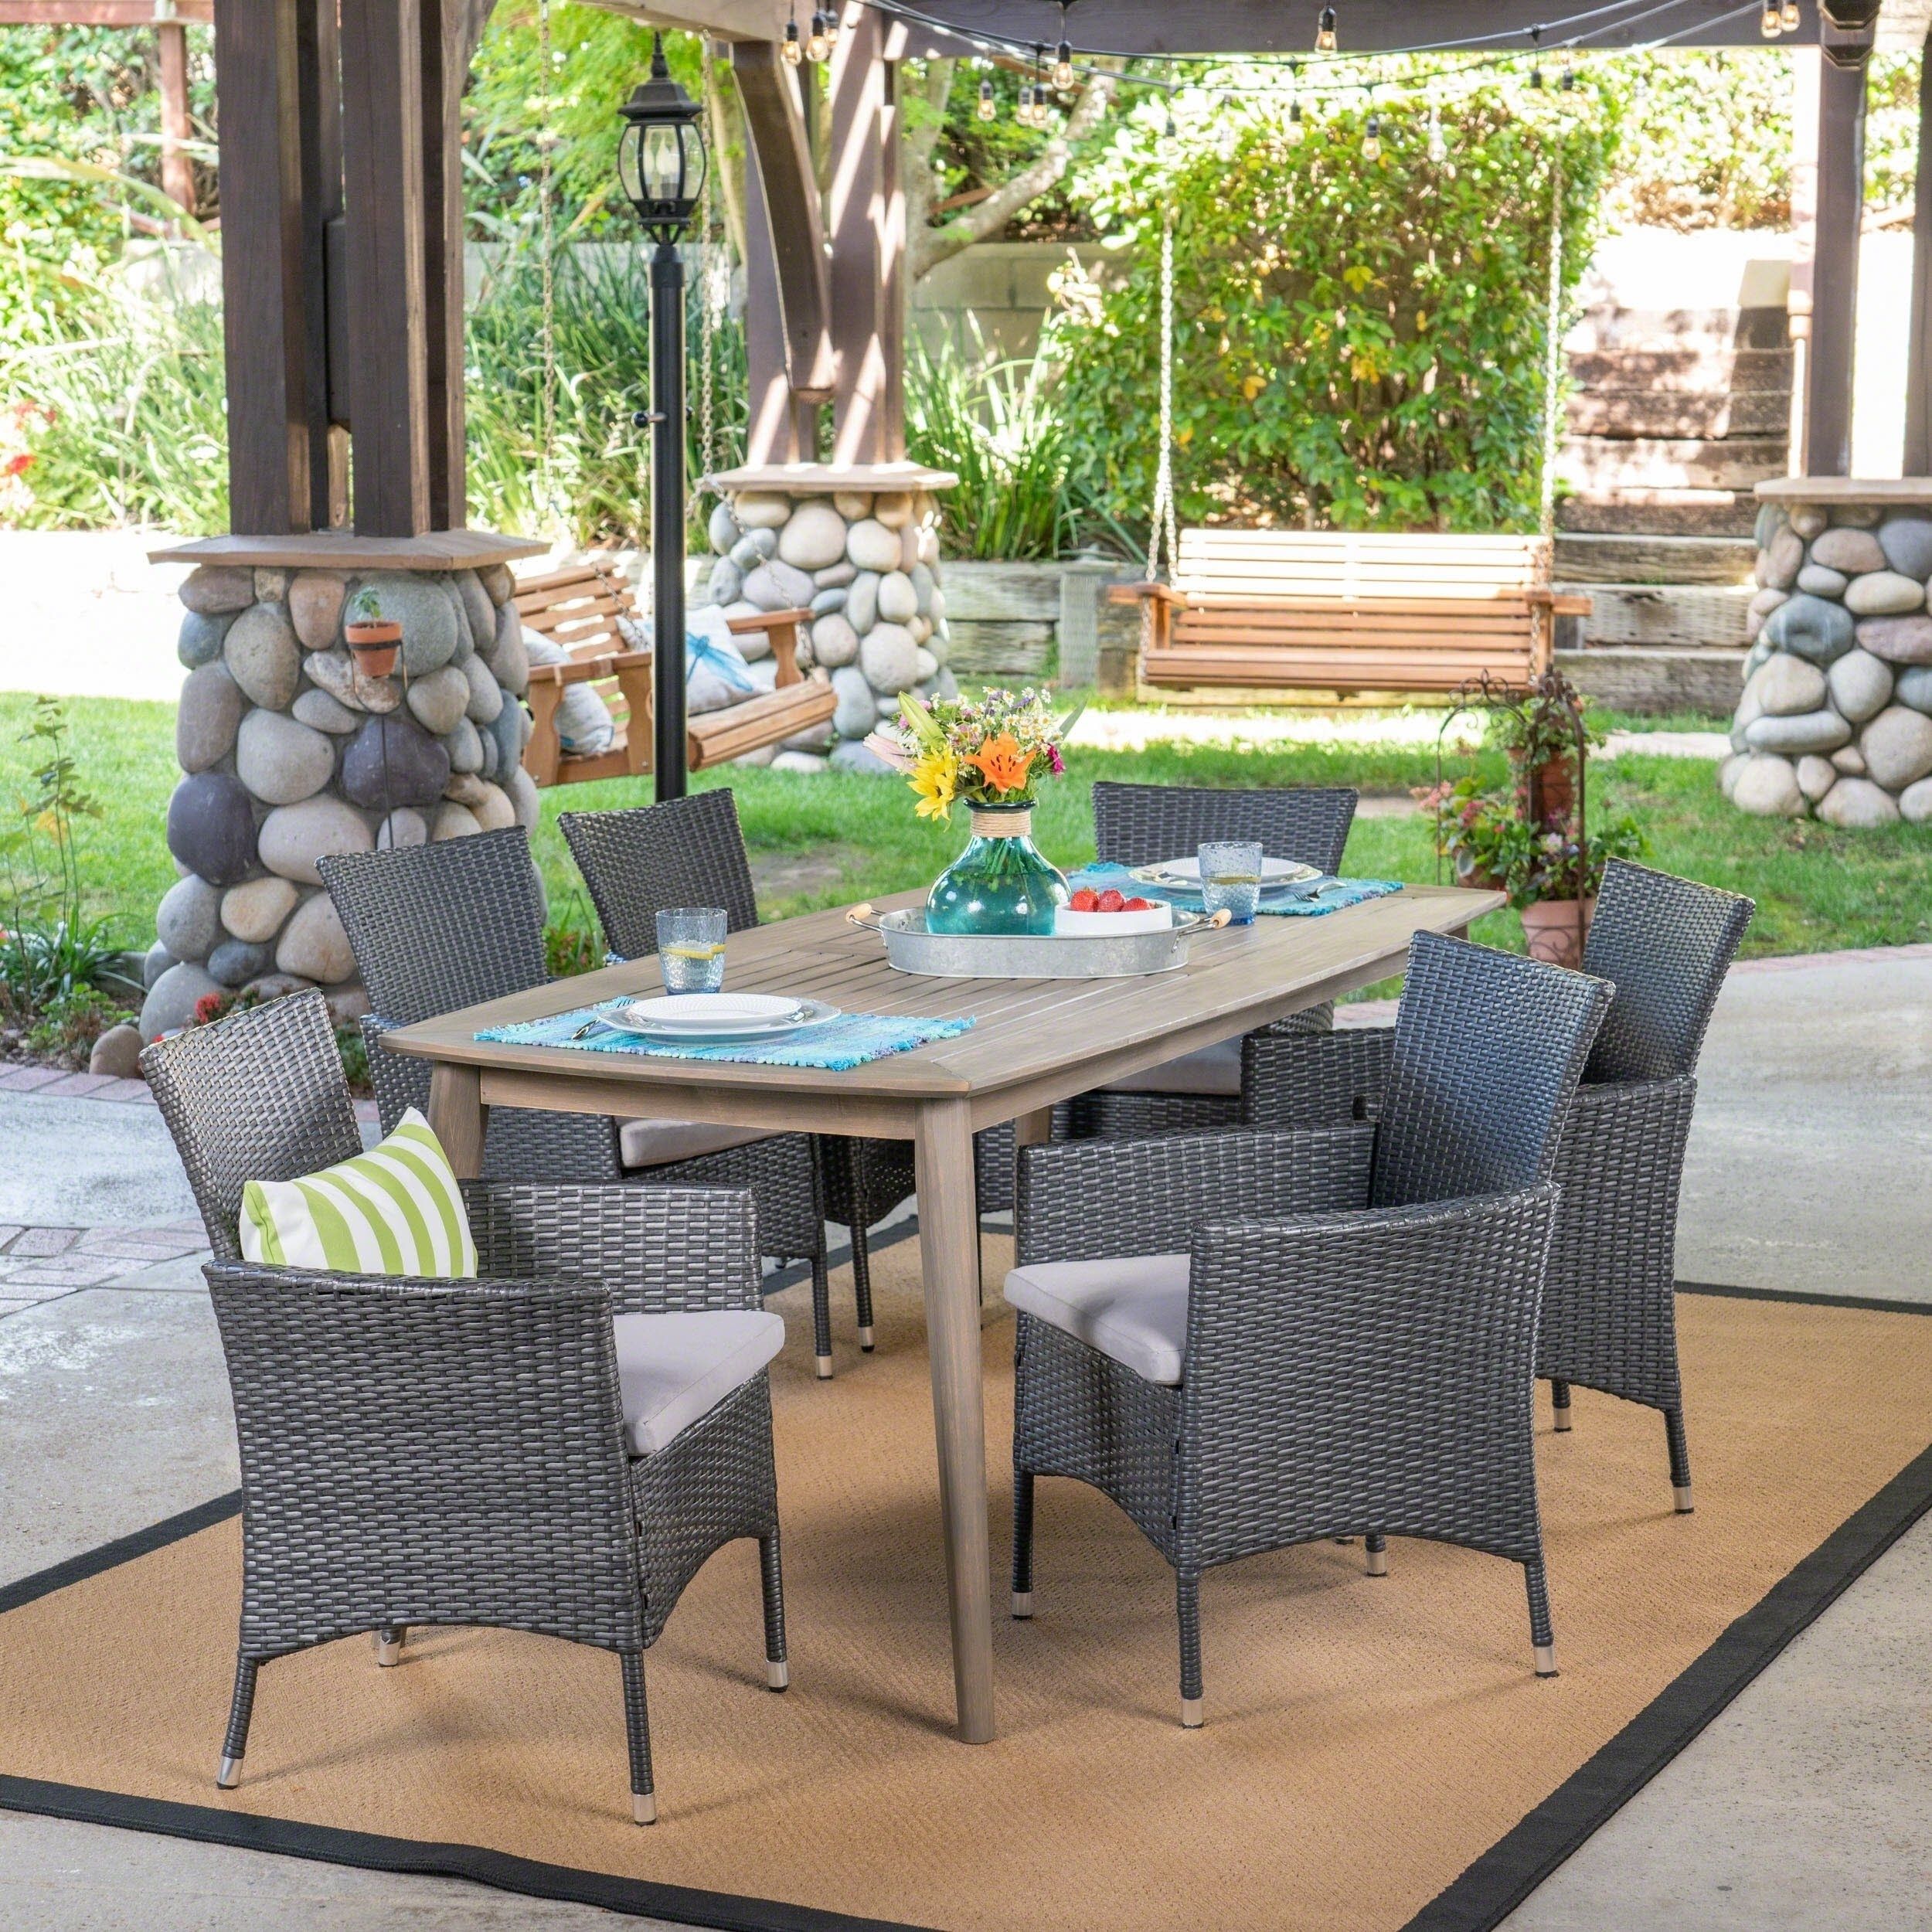 Shop Jaxon Outdoor 7 Piece Multibrown Pe Wicker Dining Set With Throughout Most Up To Date Jaxon Grey 7 Piece Rectangle Extension Dining Sets With Uph Chairs (View 13 of 20)